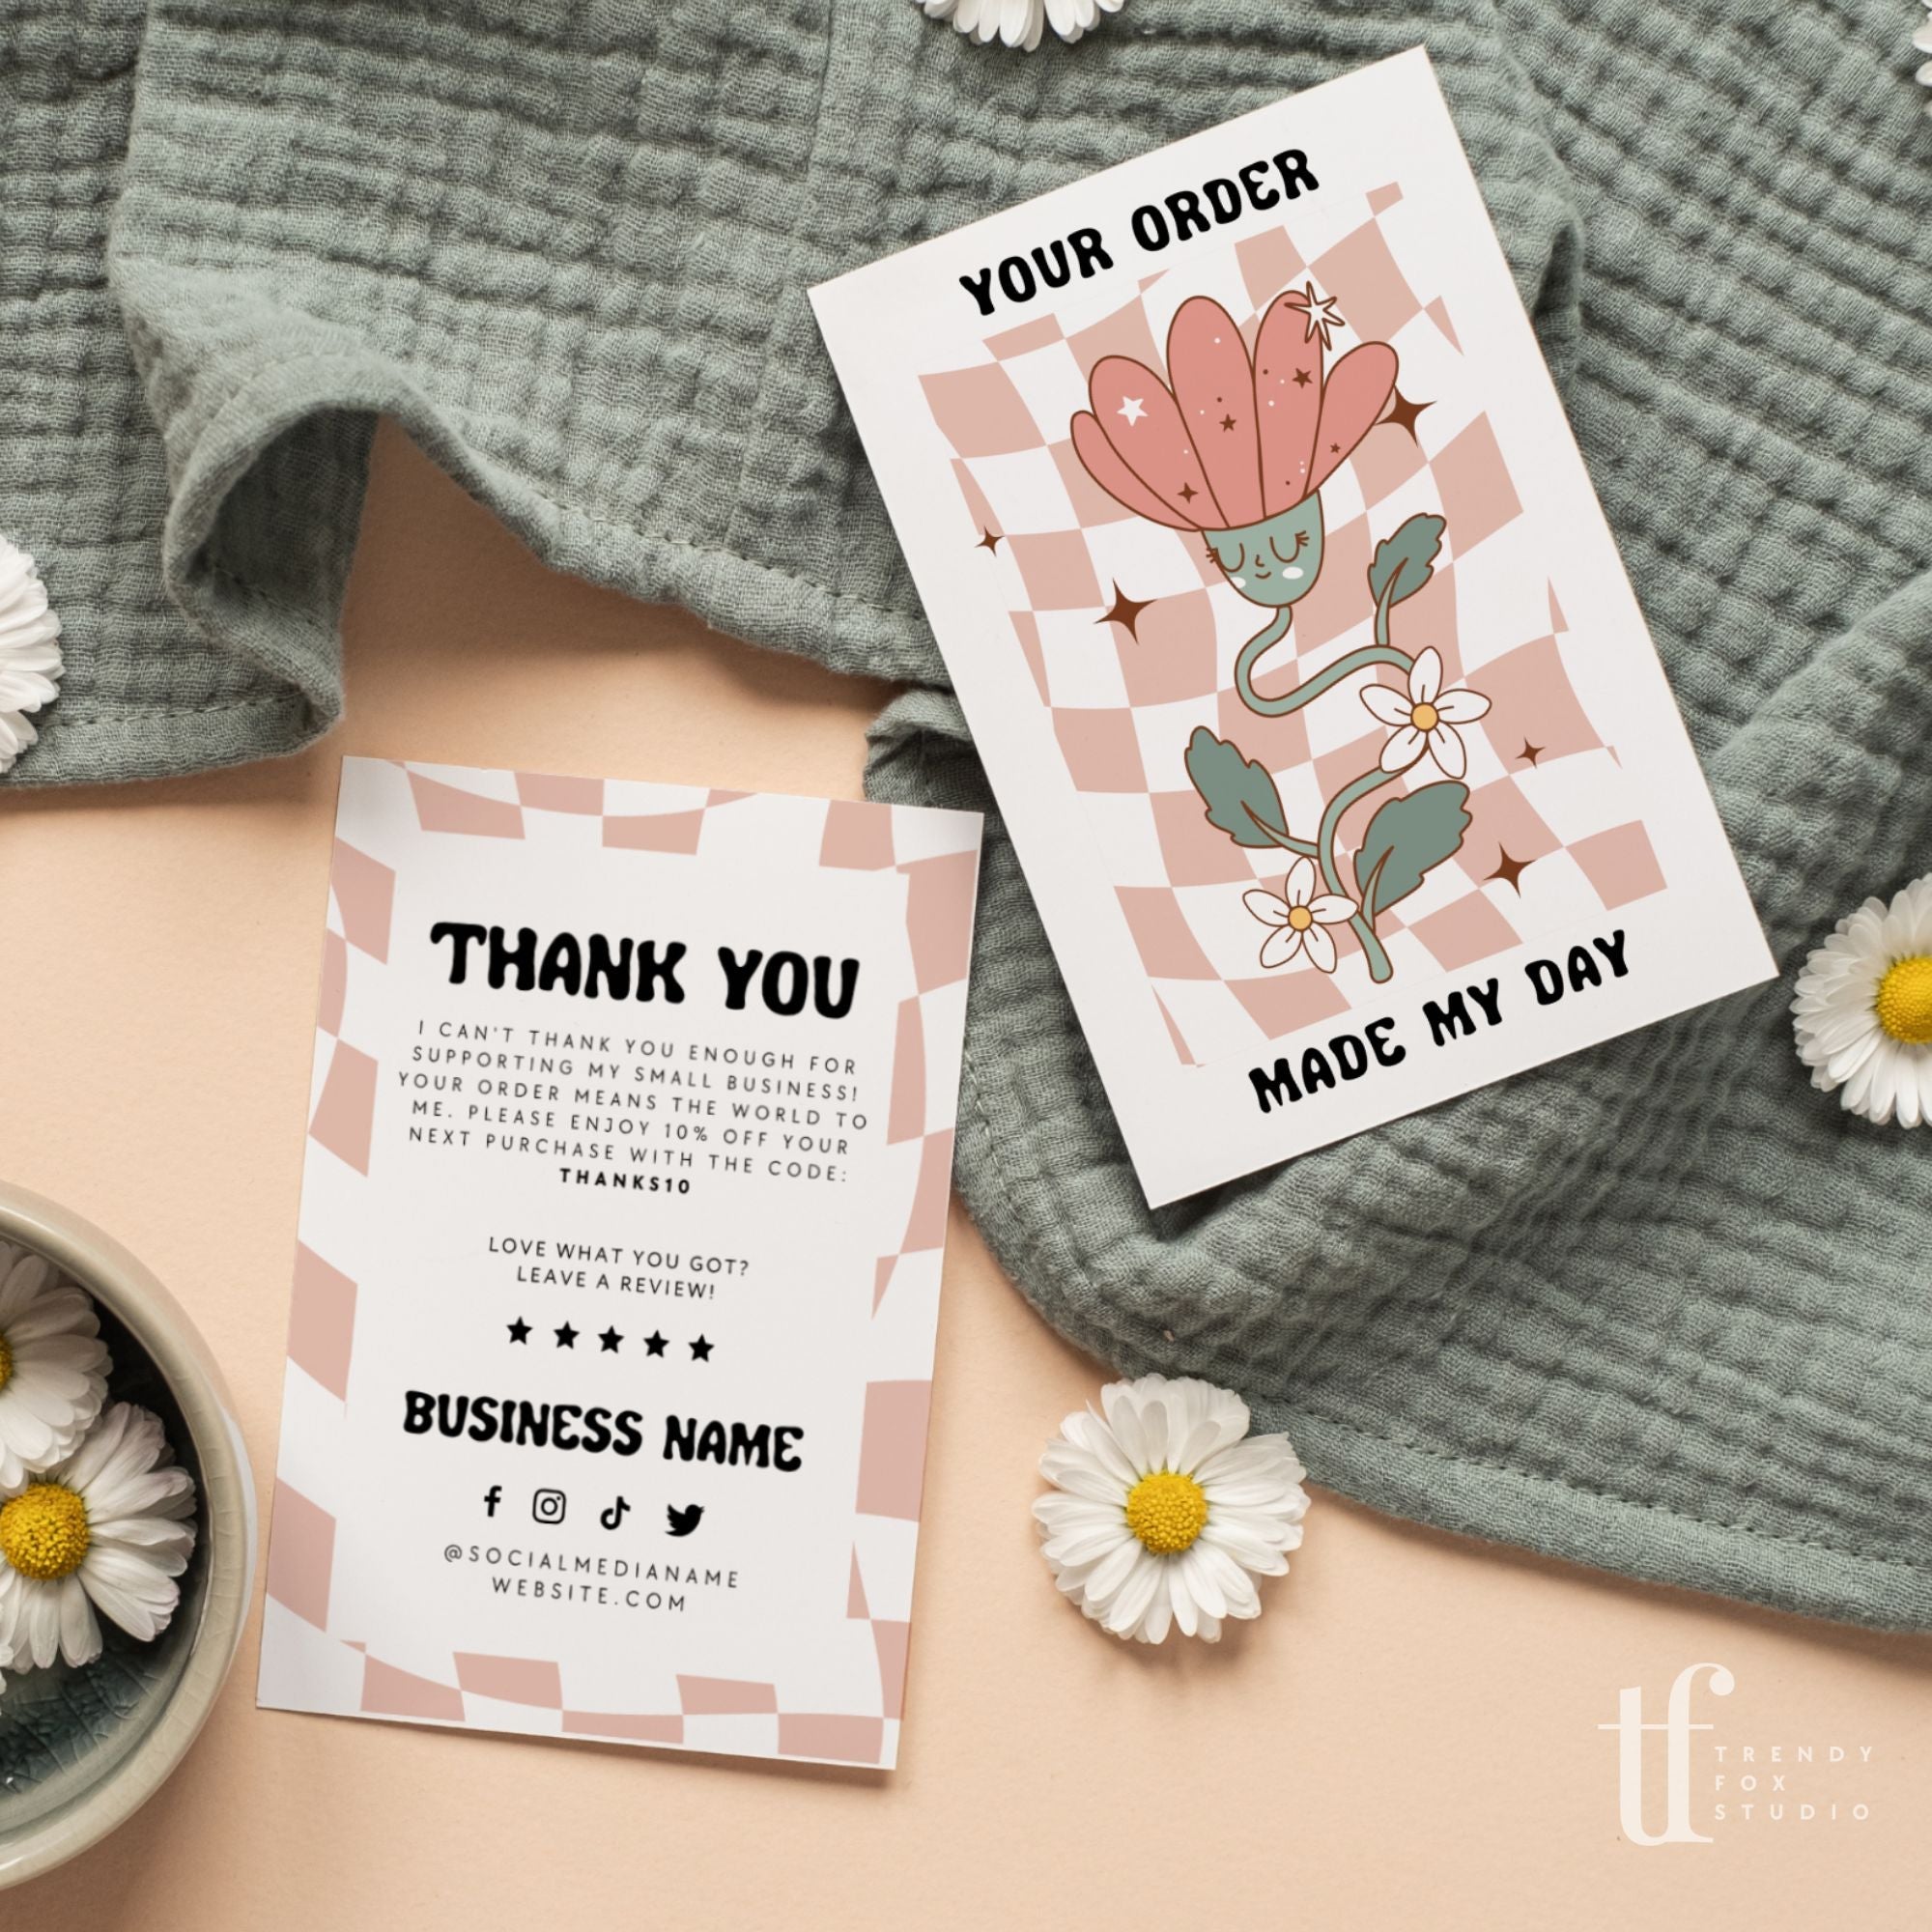 Retro Groovy Checkered Business Thank You Card Canva Template - Trendy Fox Studio